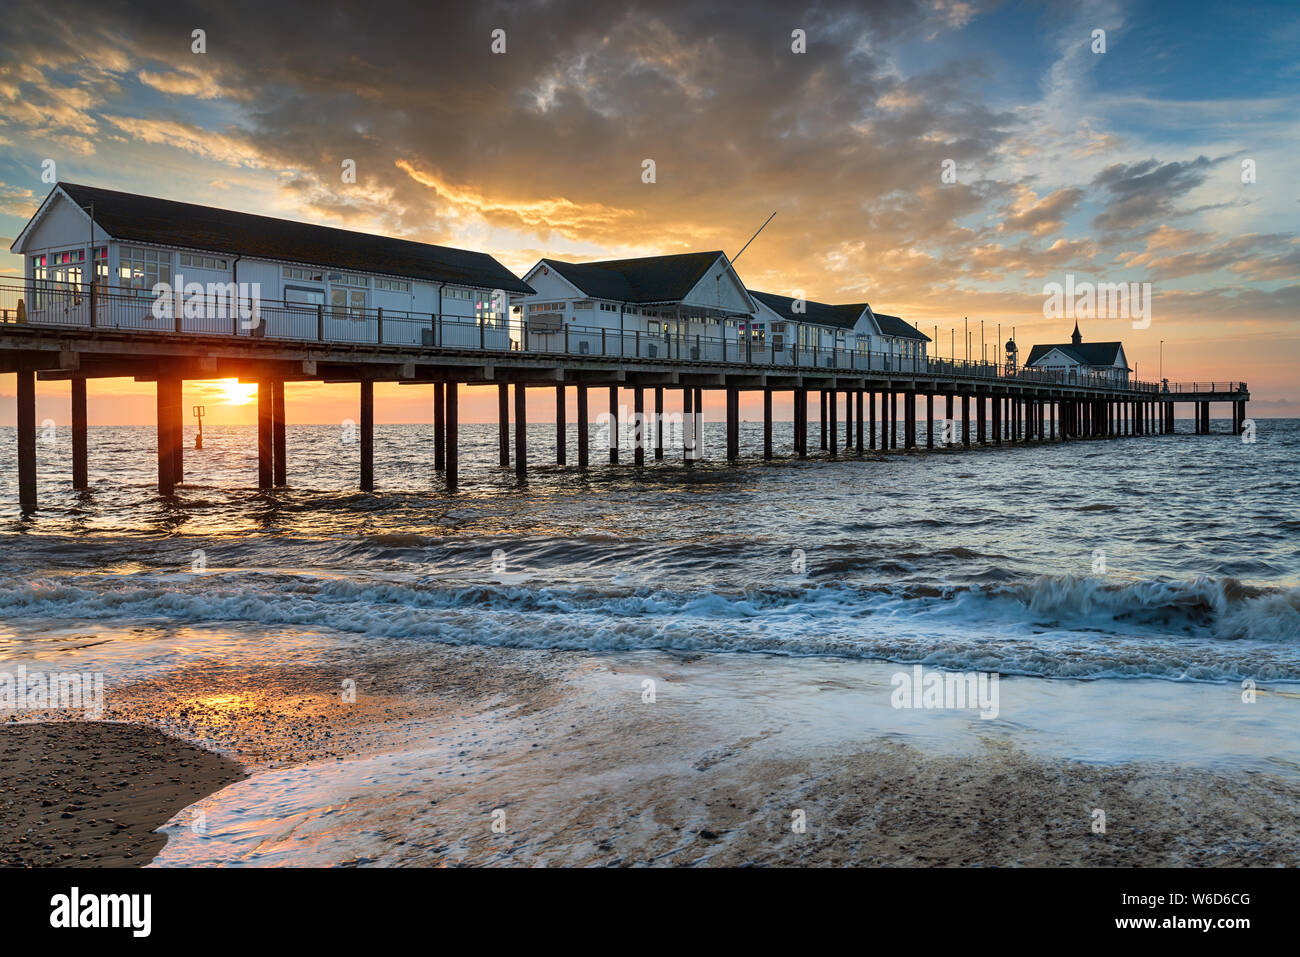 Sunrise over the pier at Southwold, a pretty seaside town on the Suffolk coast Stock Photo